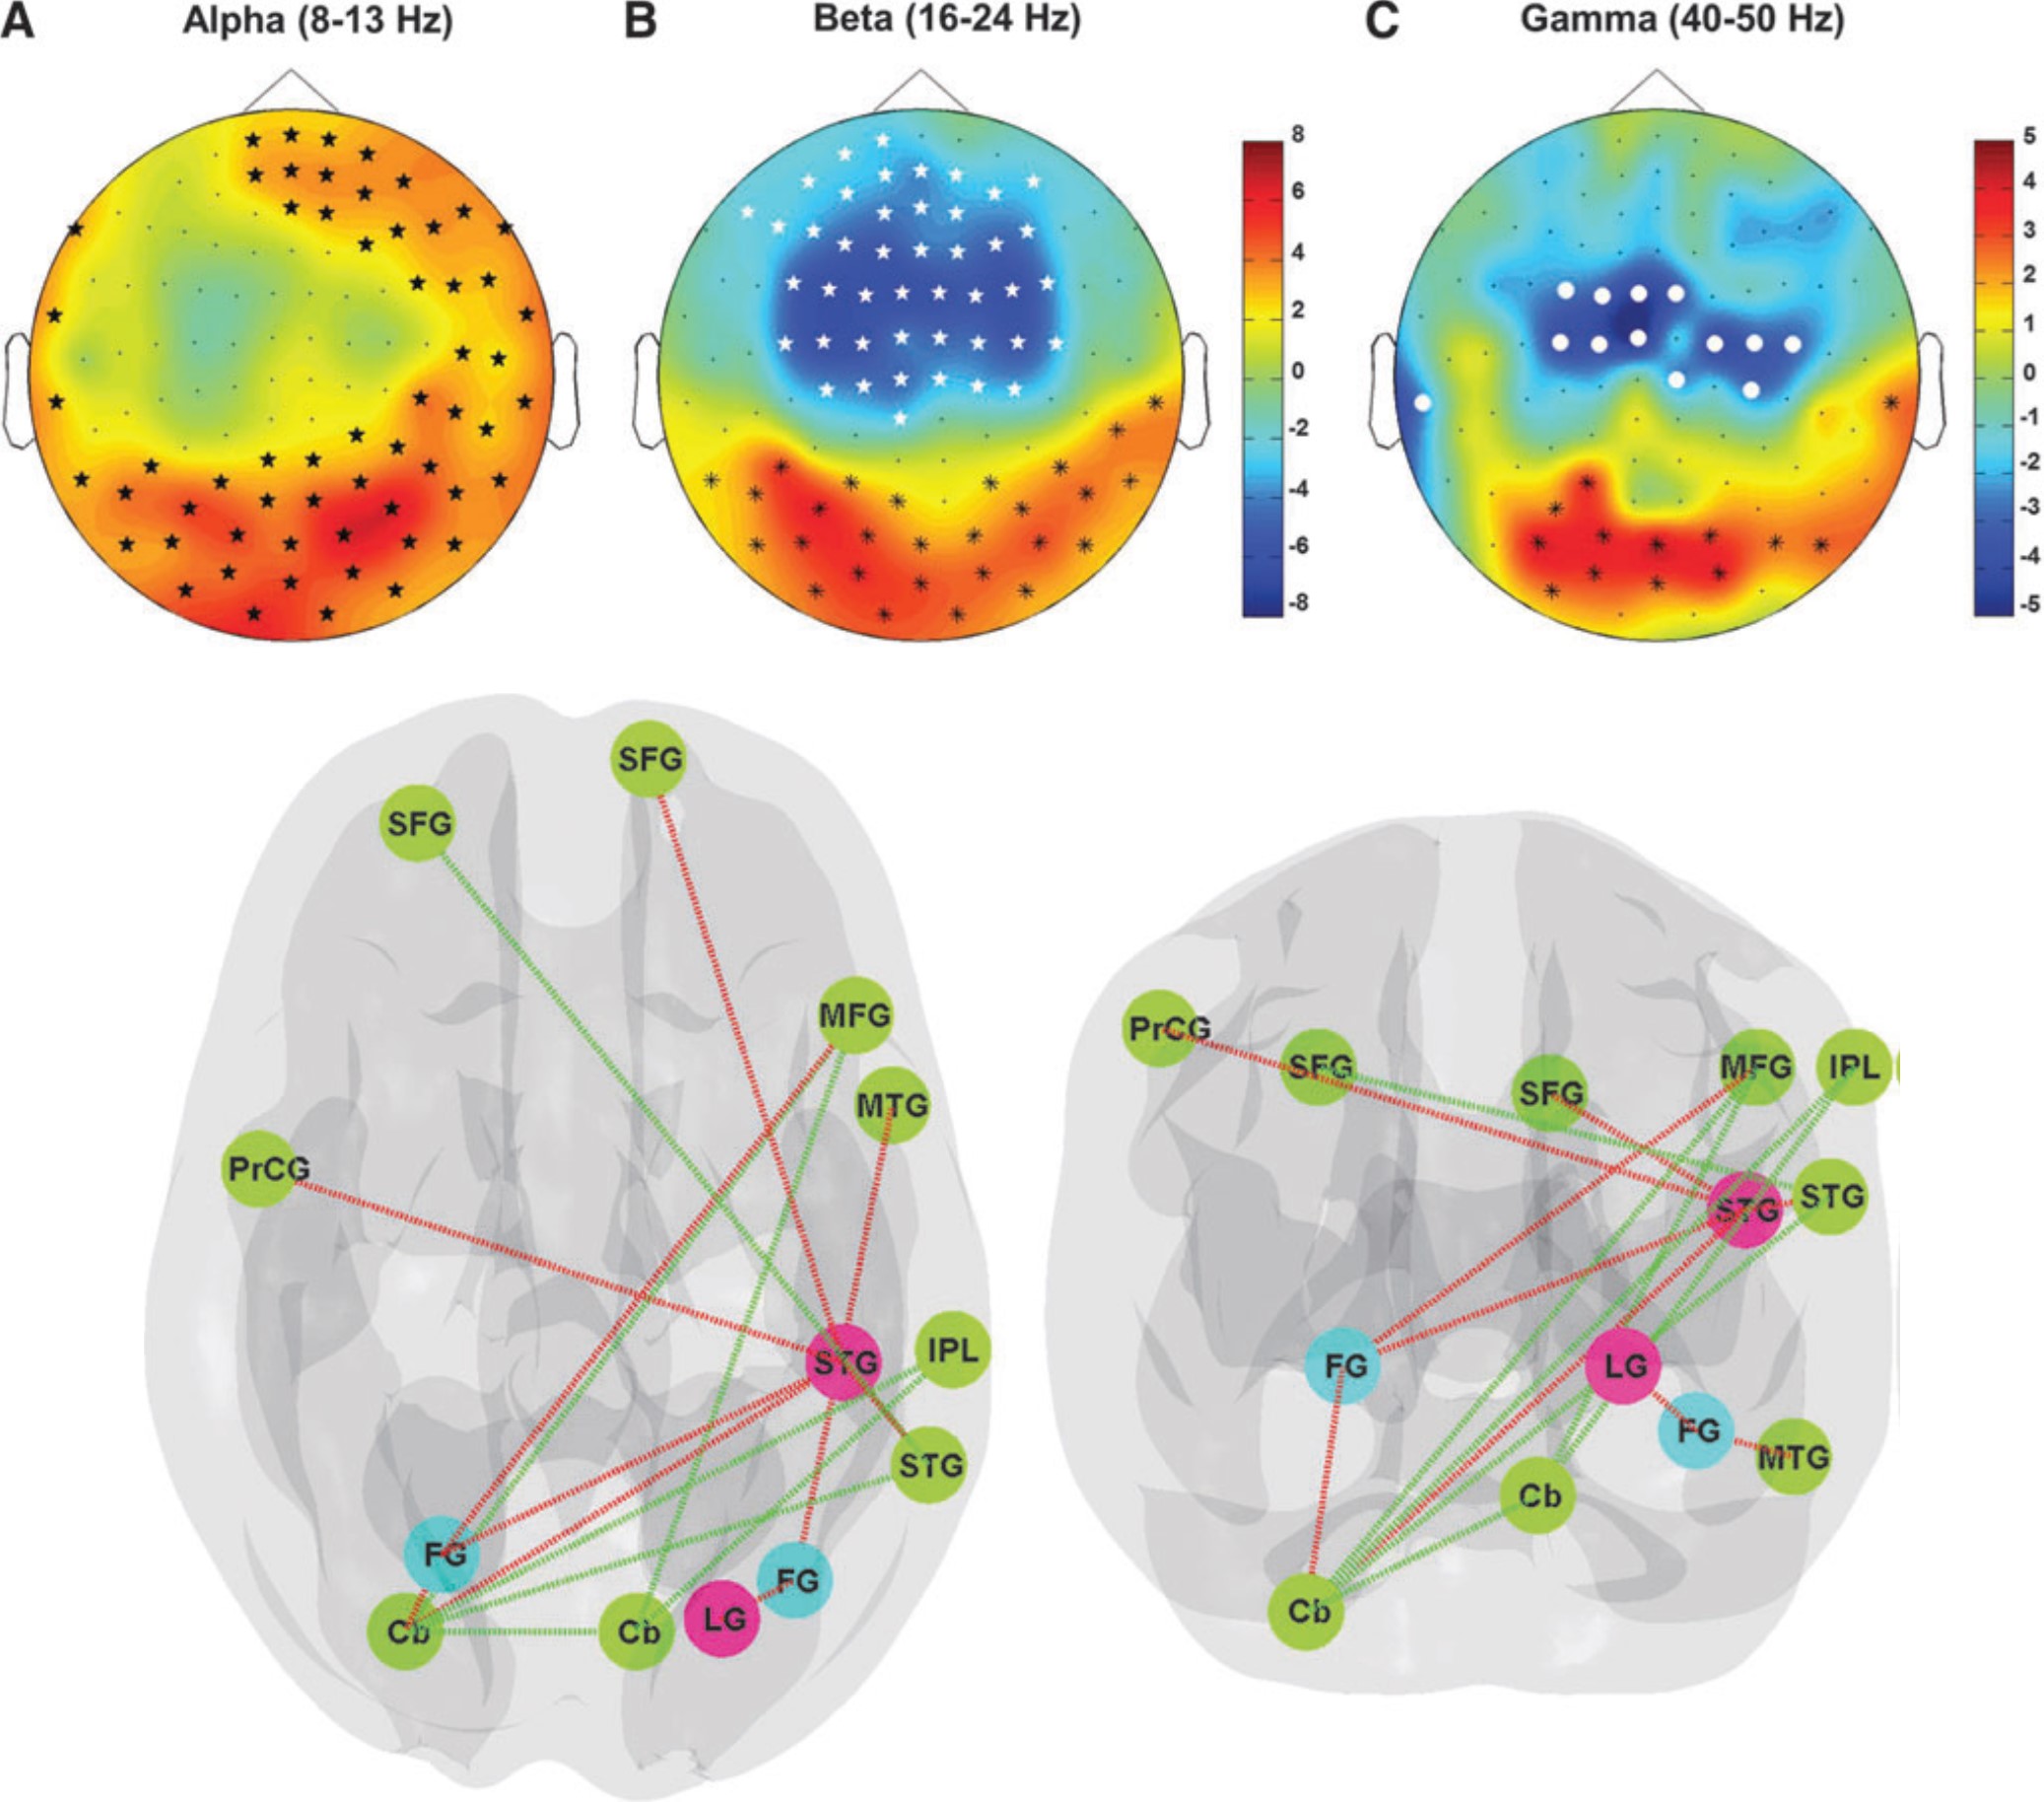 Cross-Frequency Power Correlations Reveal the Right Superior Temporal Gyrus as a Hub Region During Working Memory Maintenance